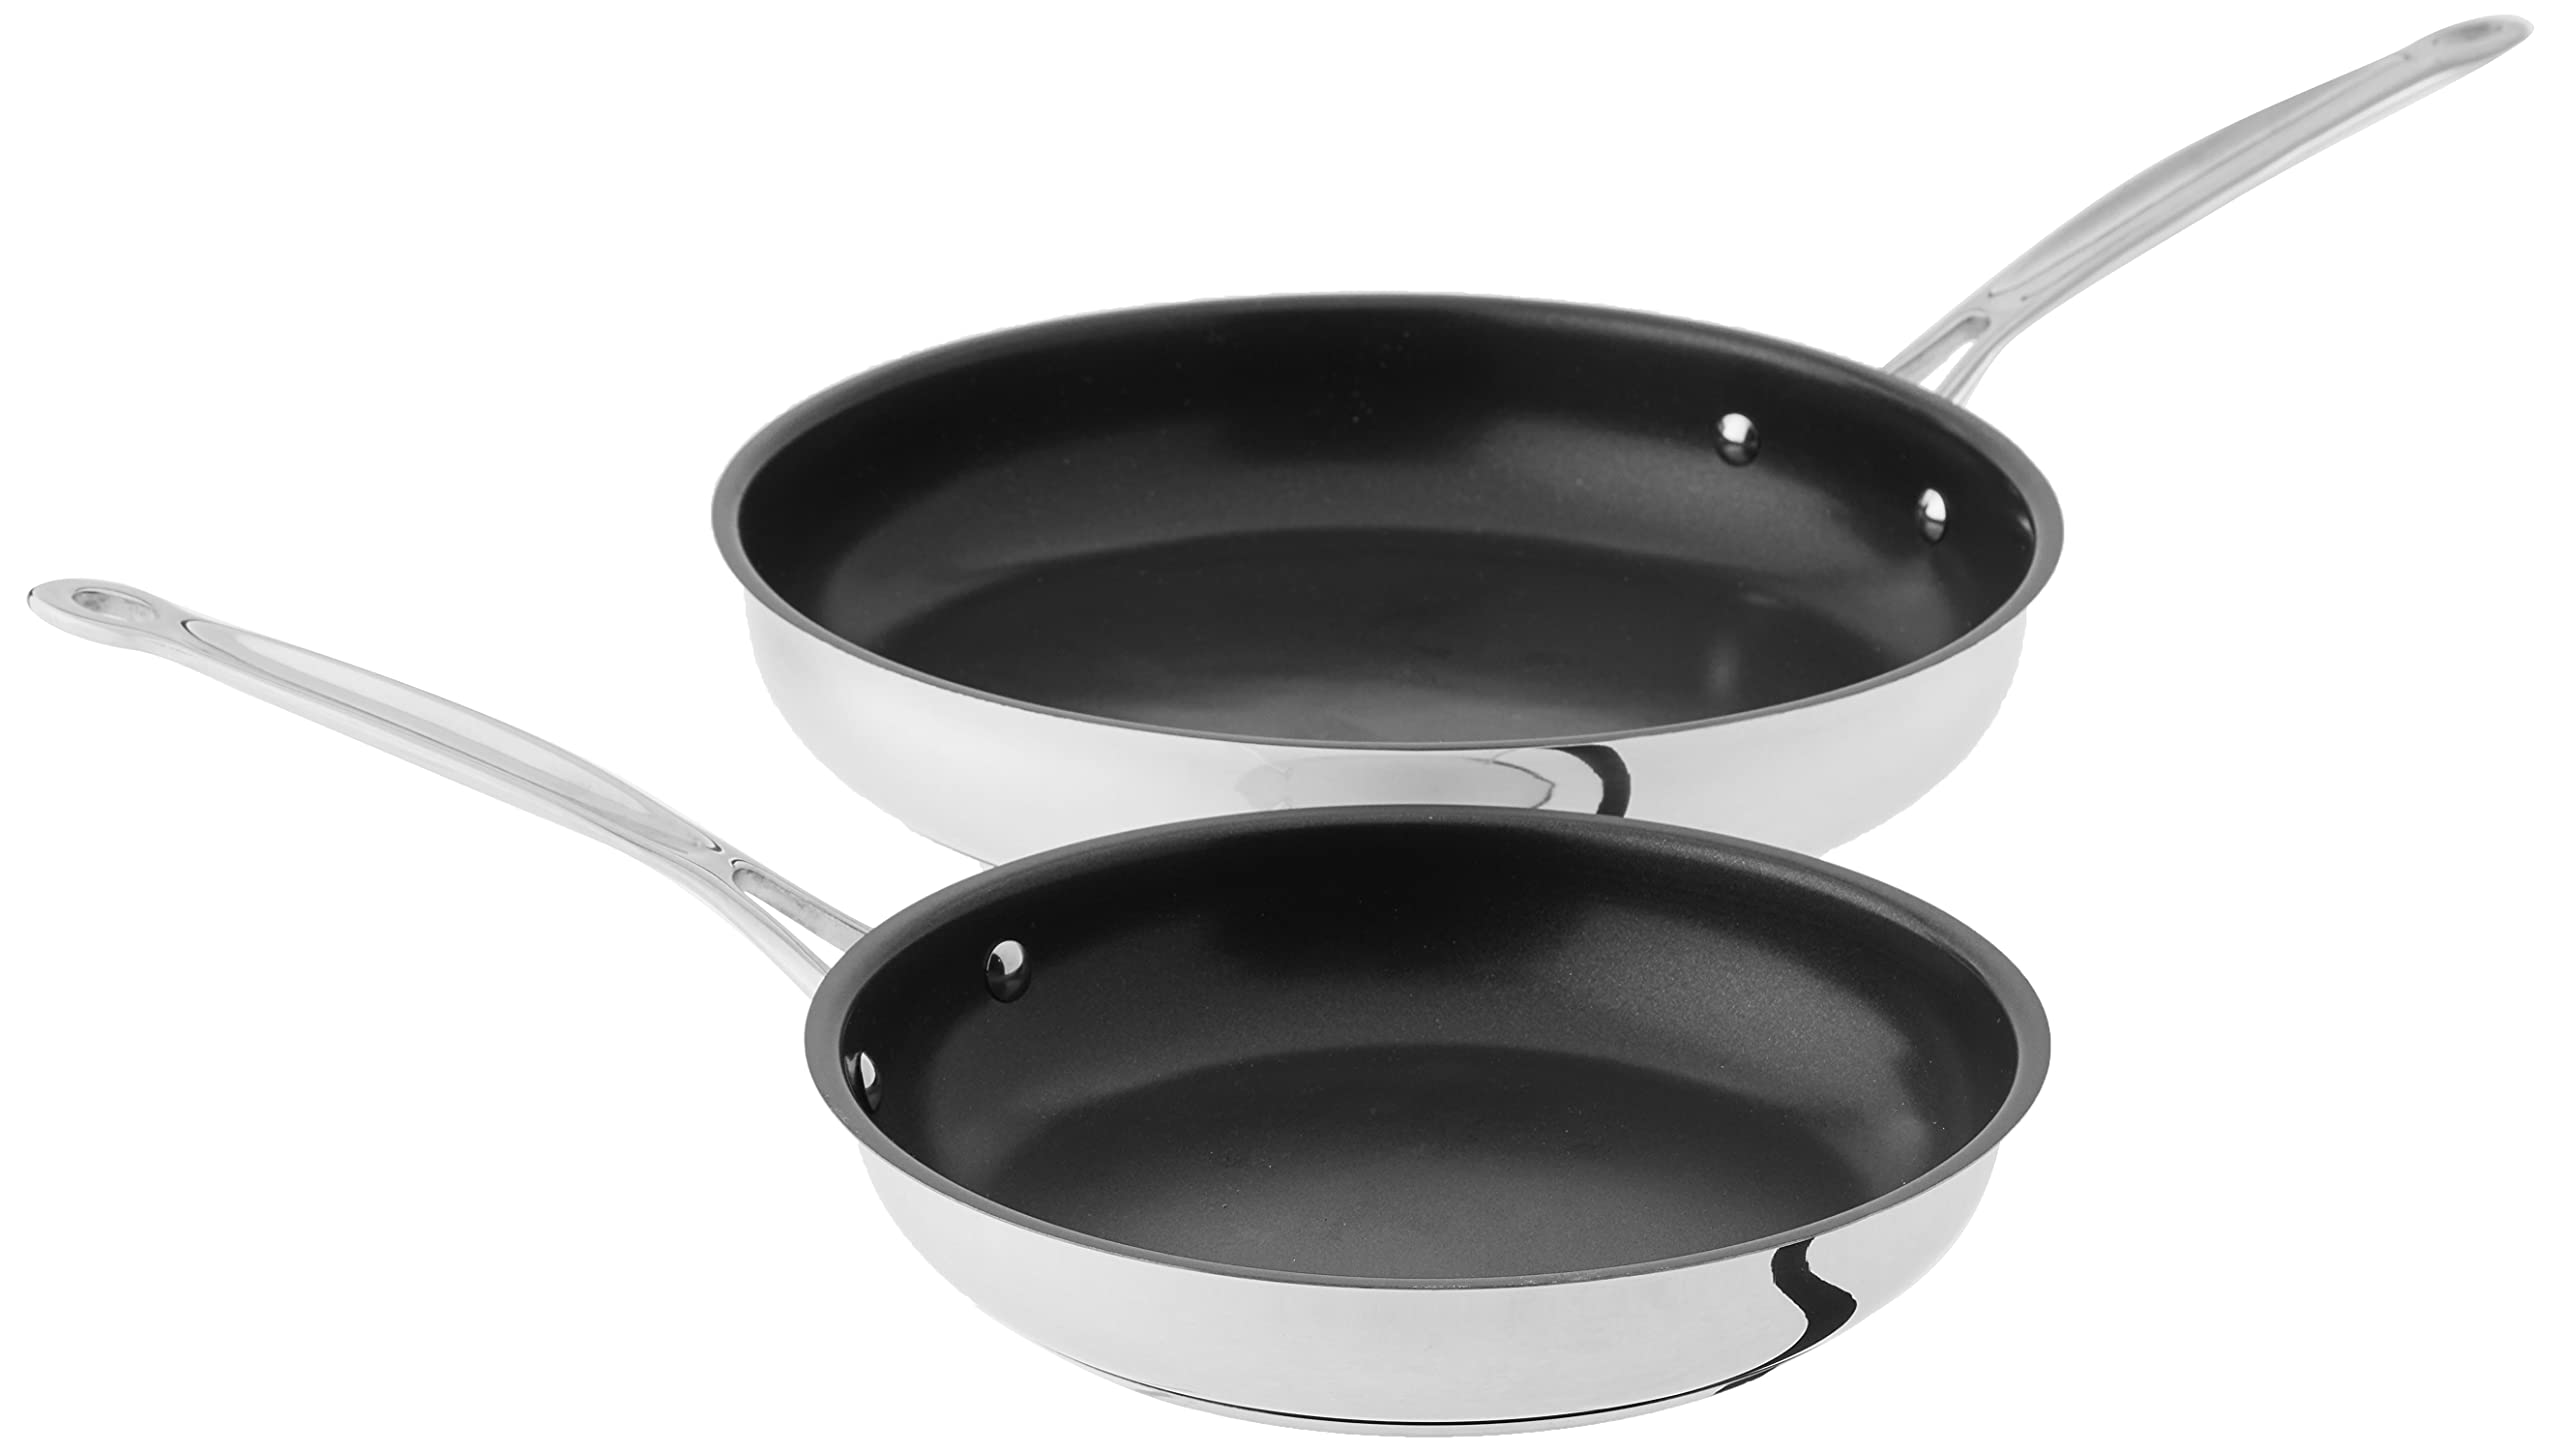 Cuisinart Chef's Classic Stainless Nonstick 2-Piece 9-Inch and 11-Inch Skillet Set - Black And Silver & 622-30G Nonstick-Hard-Anodized, 12-Inch, Skillet w/Glass Cover